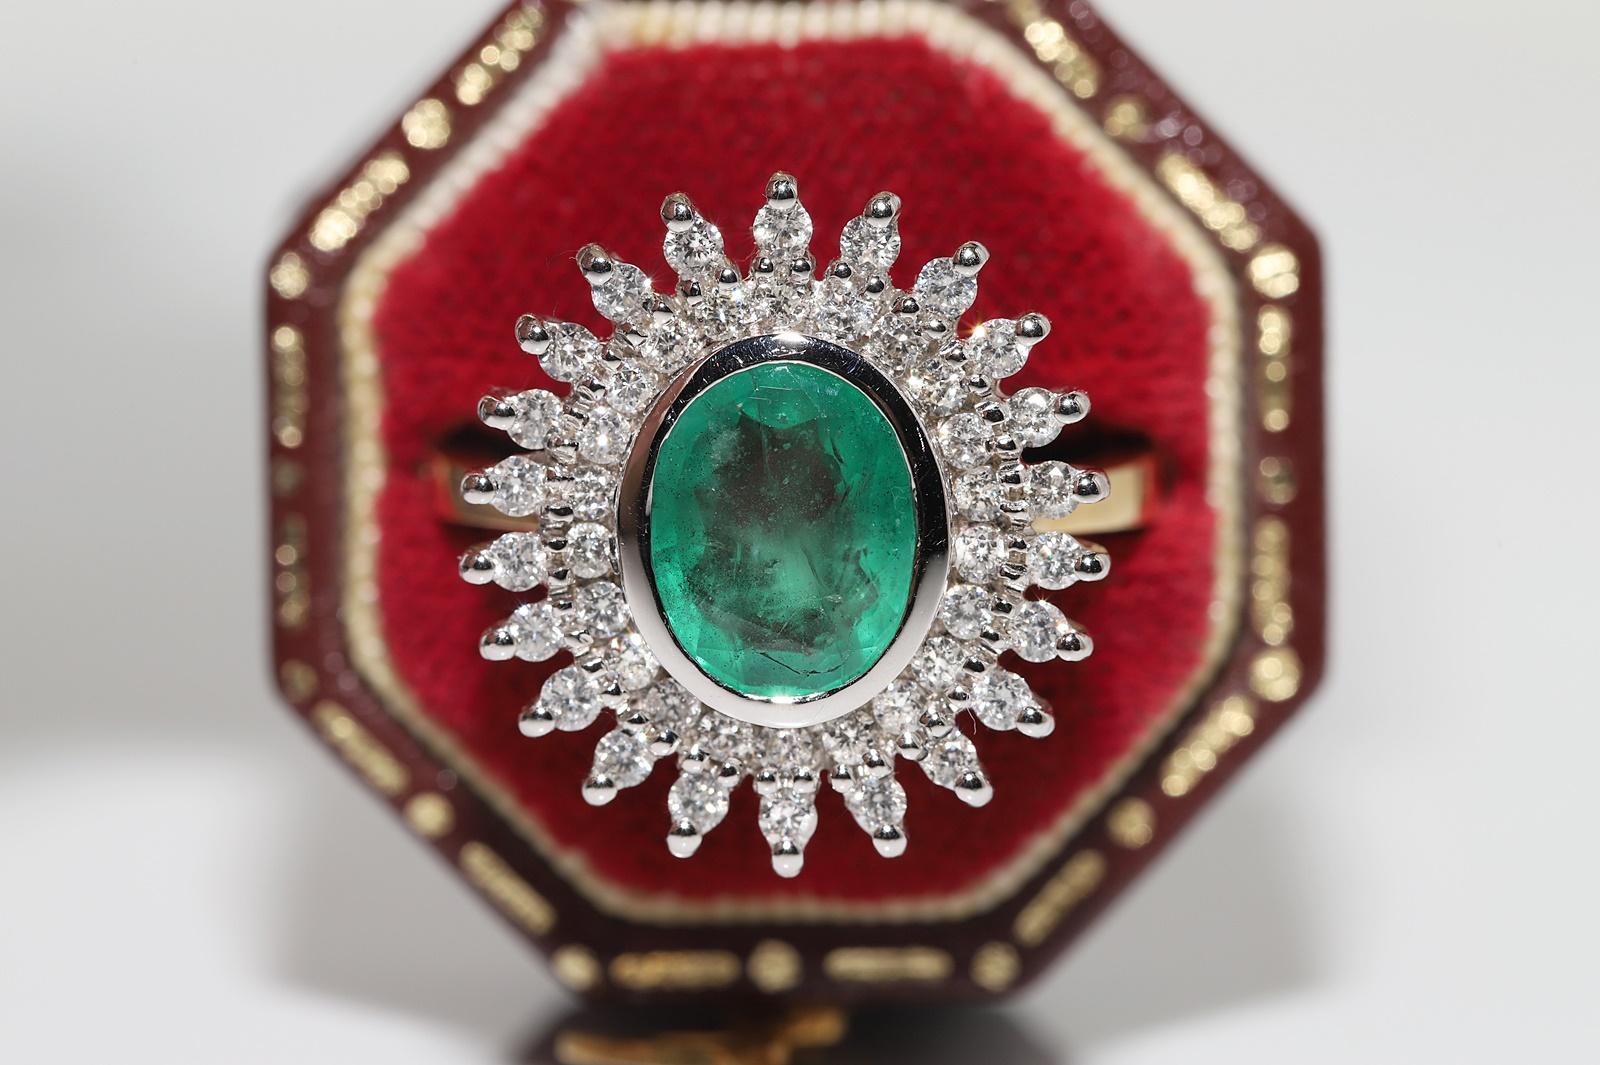 In very good condition.
Total weight is 6.9 grams.
Totally is diamond 0.70 ct.
The diamond is has G-H color and vs-vvs clarity.
Totally is emerald 2 ct.
Ring size is US 7
We offer free resizing.
Please contact for any questions.